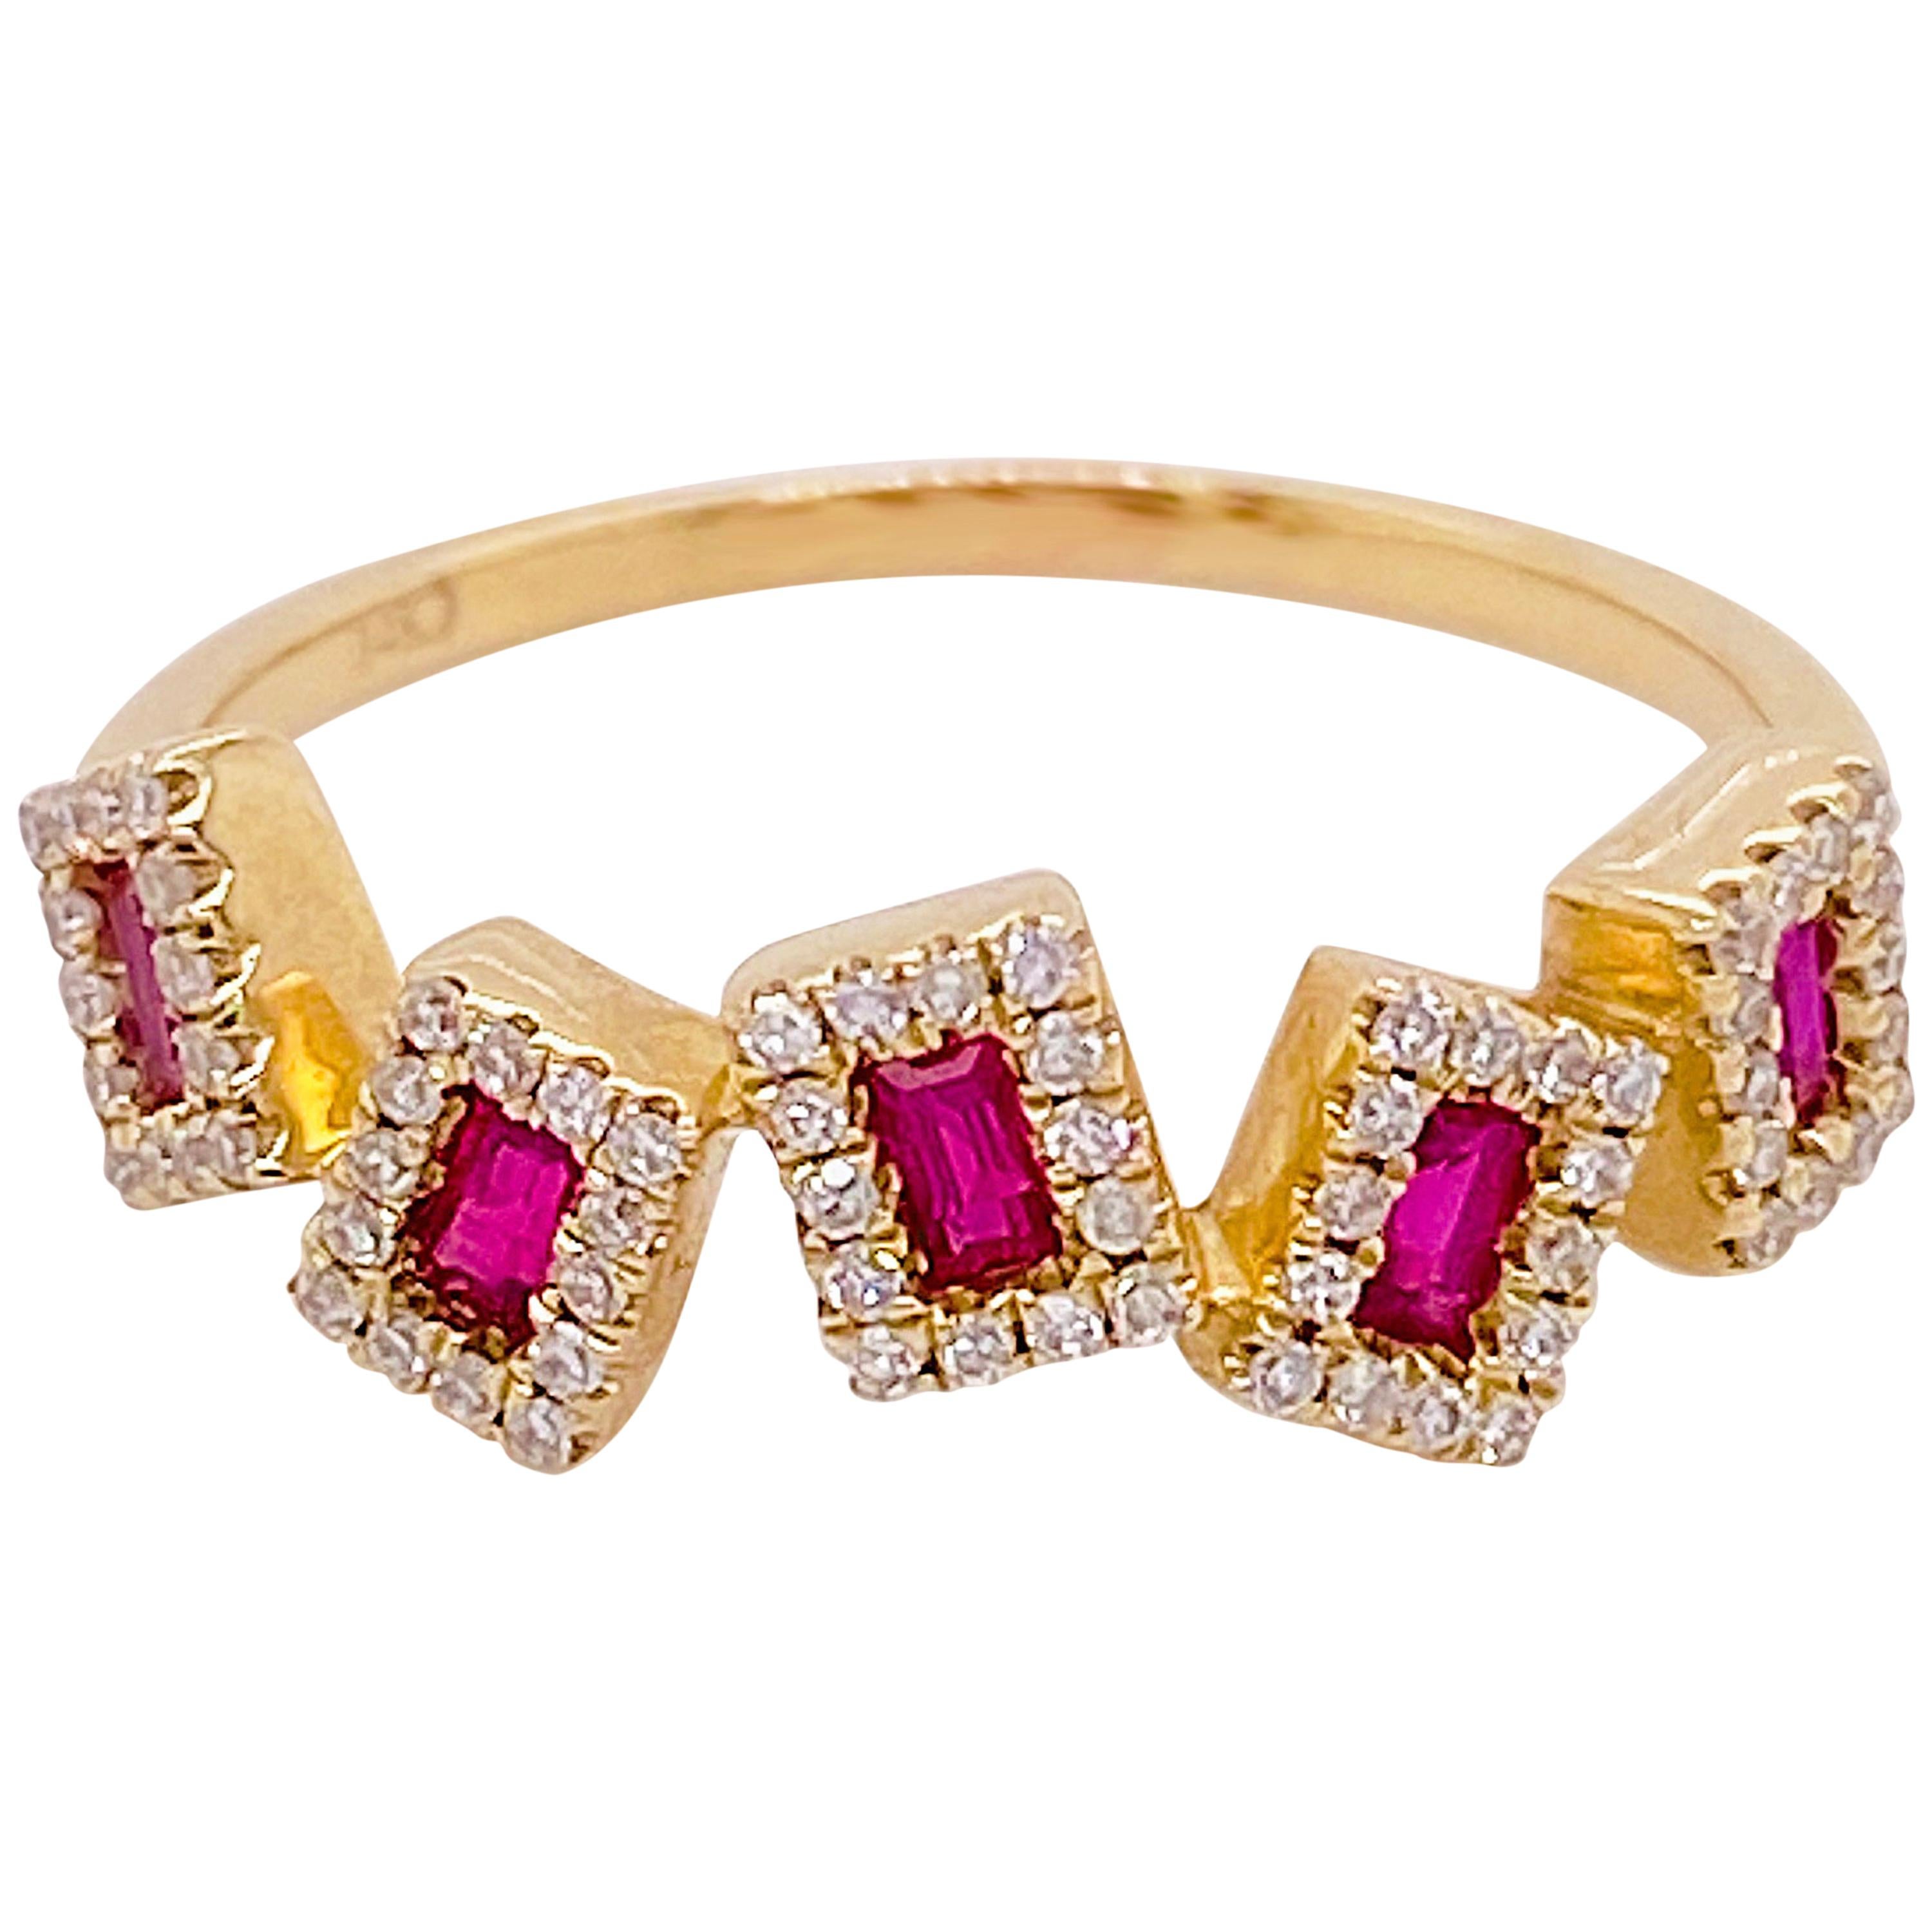 Dancing Ruby Rectangles Ring, Ruby and Diamond, 14K Yellow Gold, Artistic